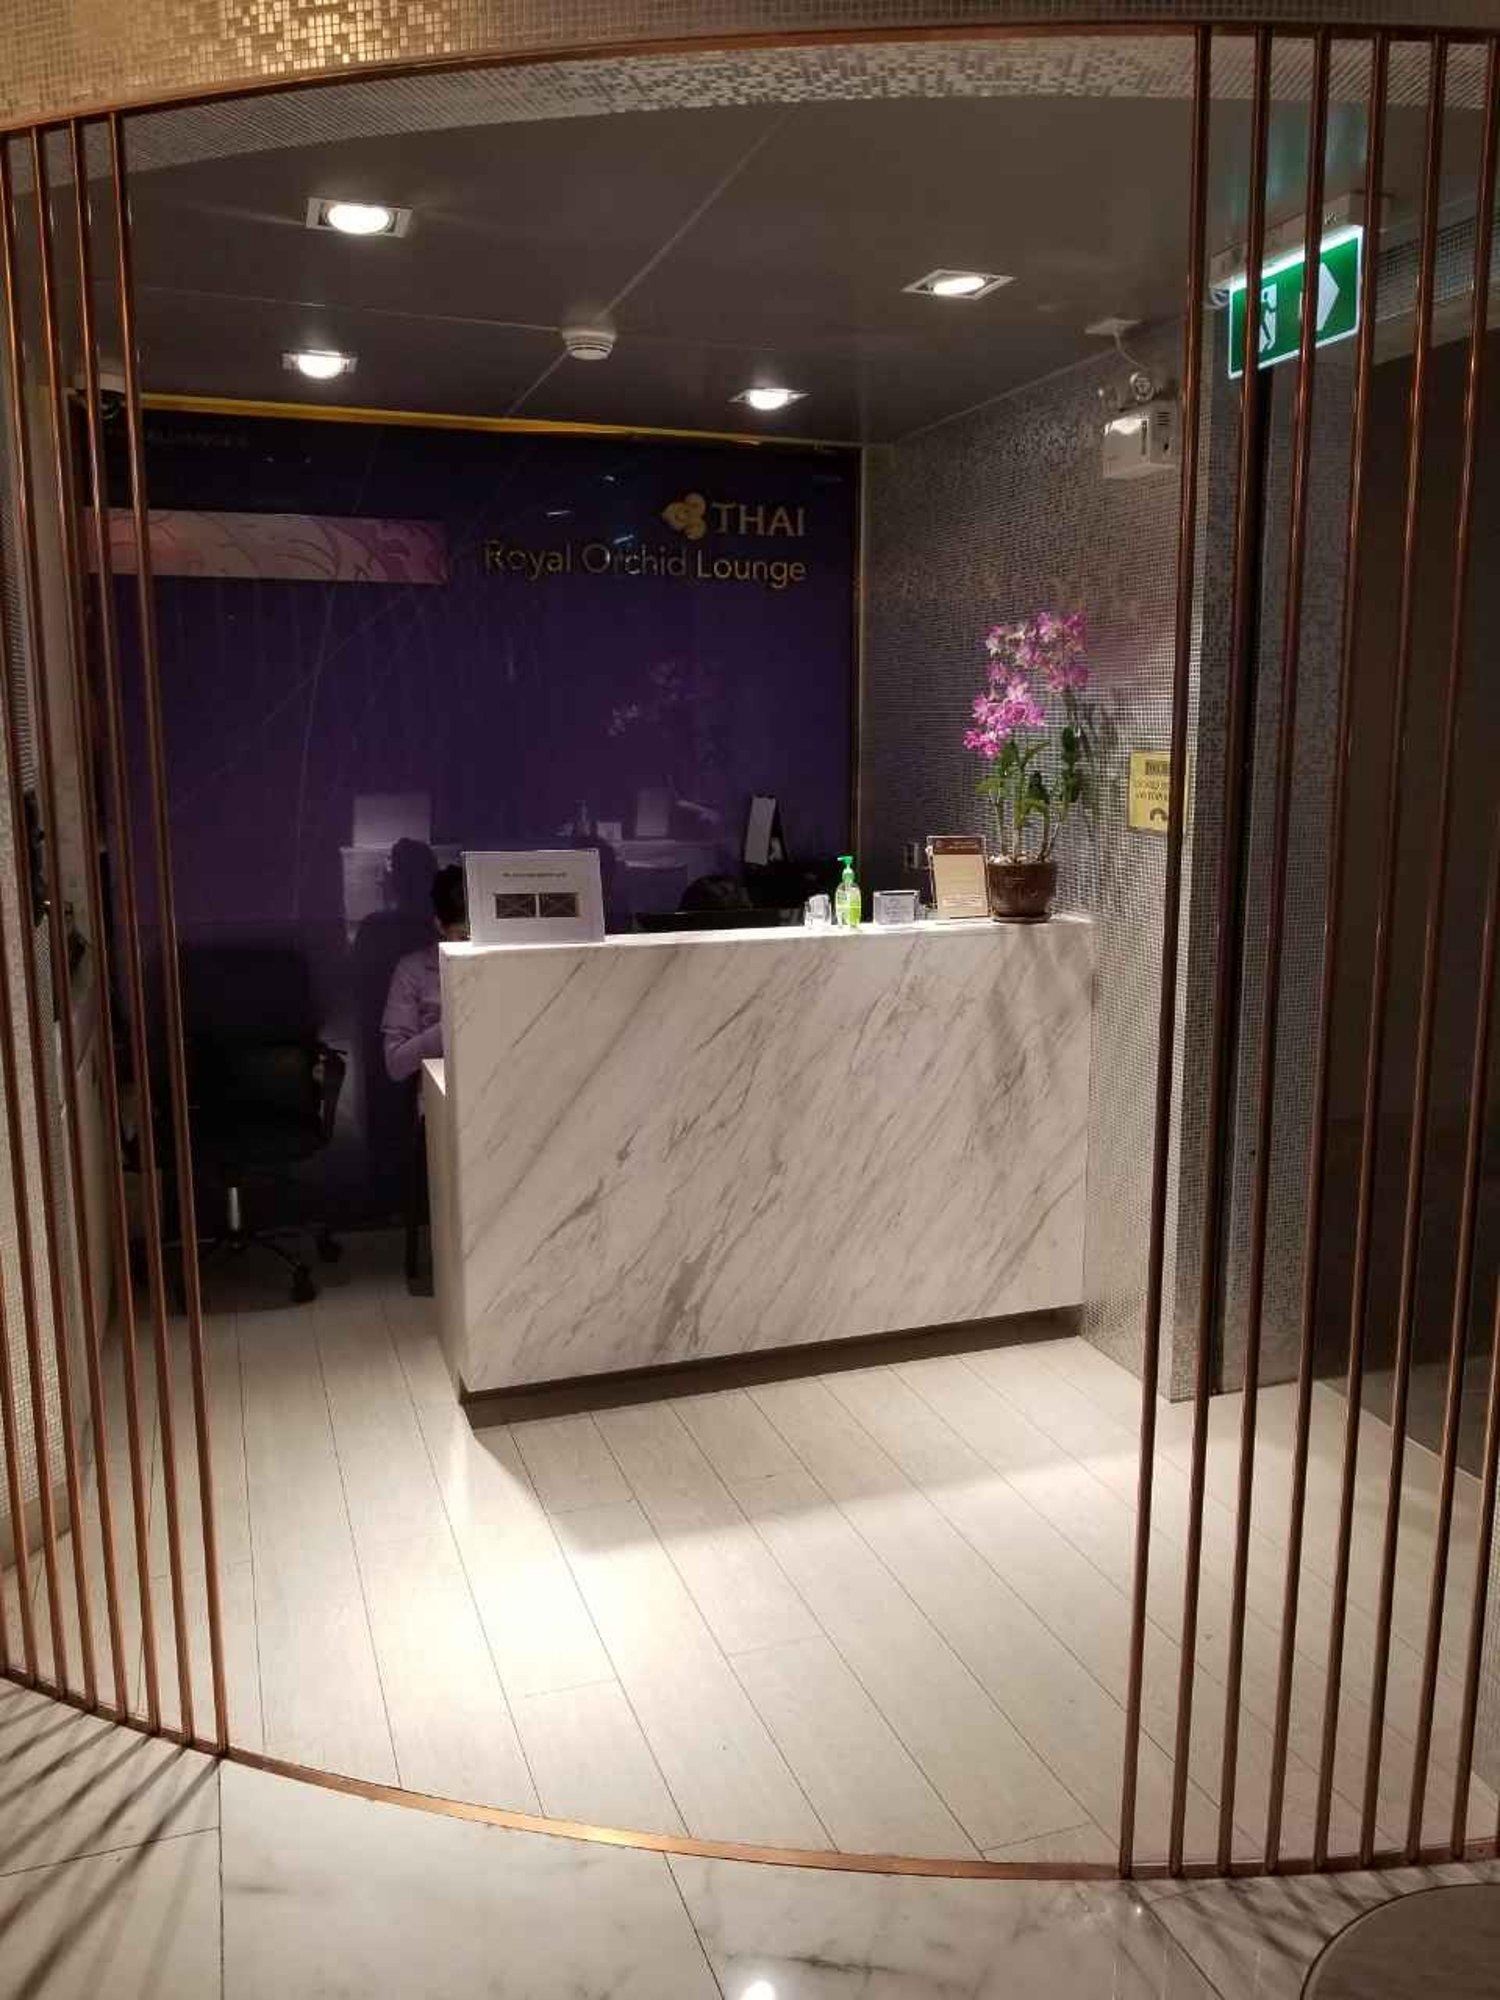 Thai Airways Royal Orchid Lounge image 9 of 9